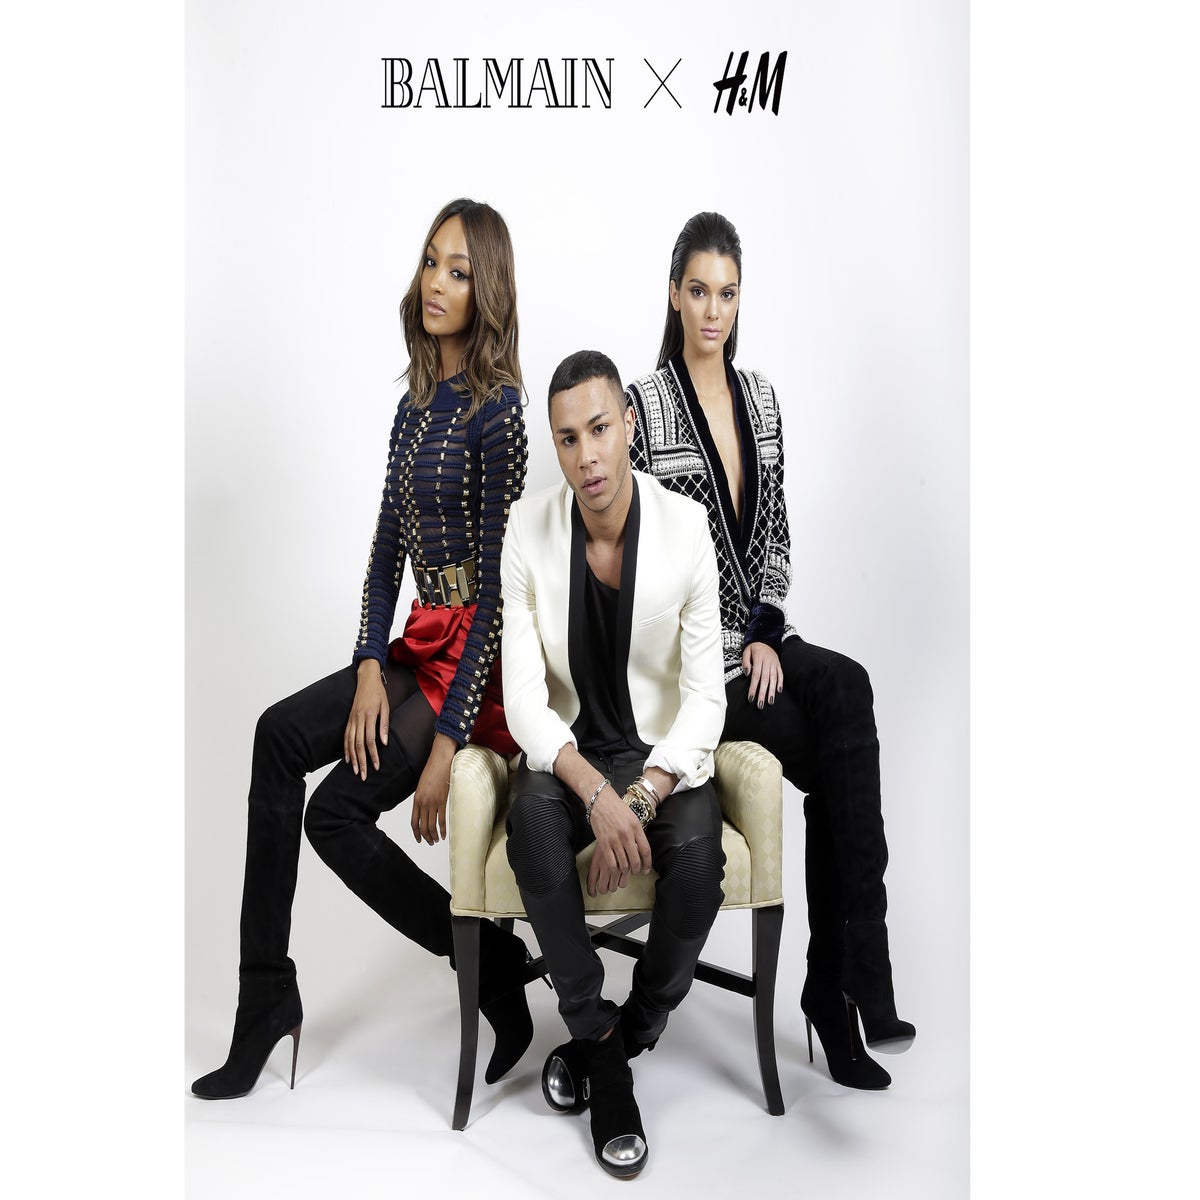 Balmain x H&M: The high street brand reveals its designer collaboration The Independent | The Independent